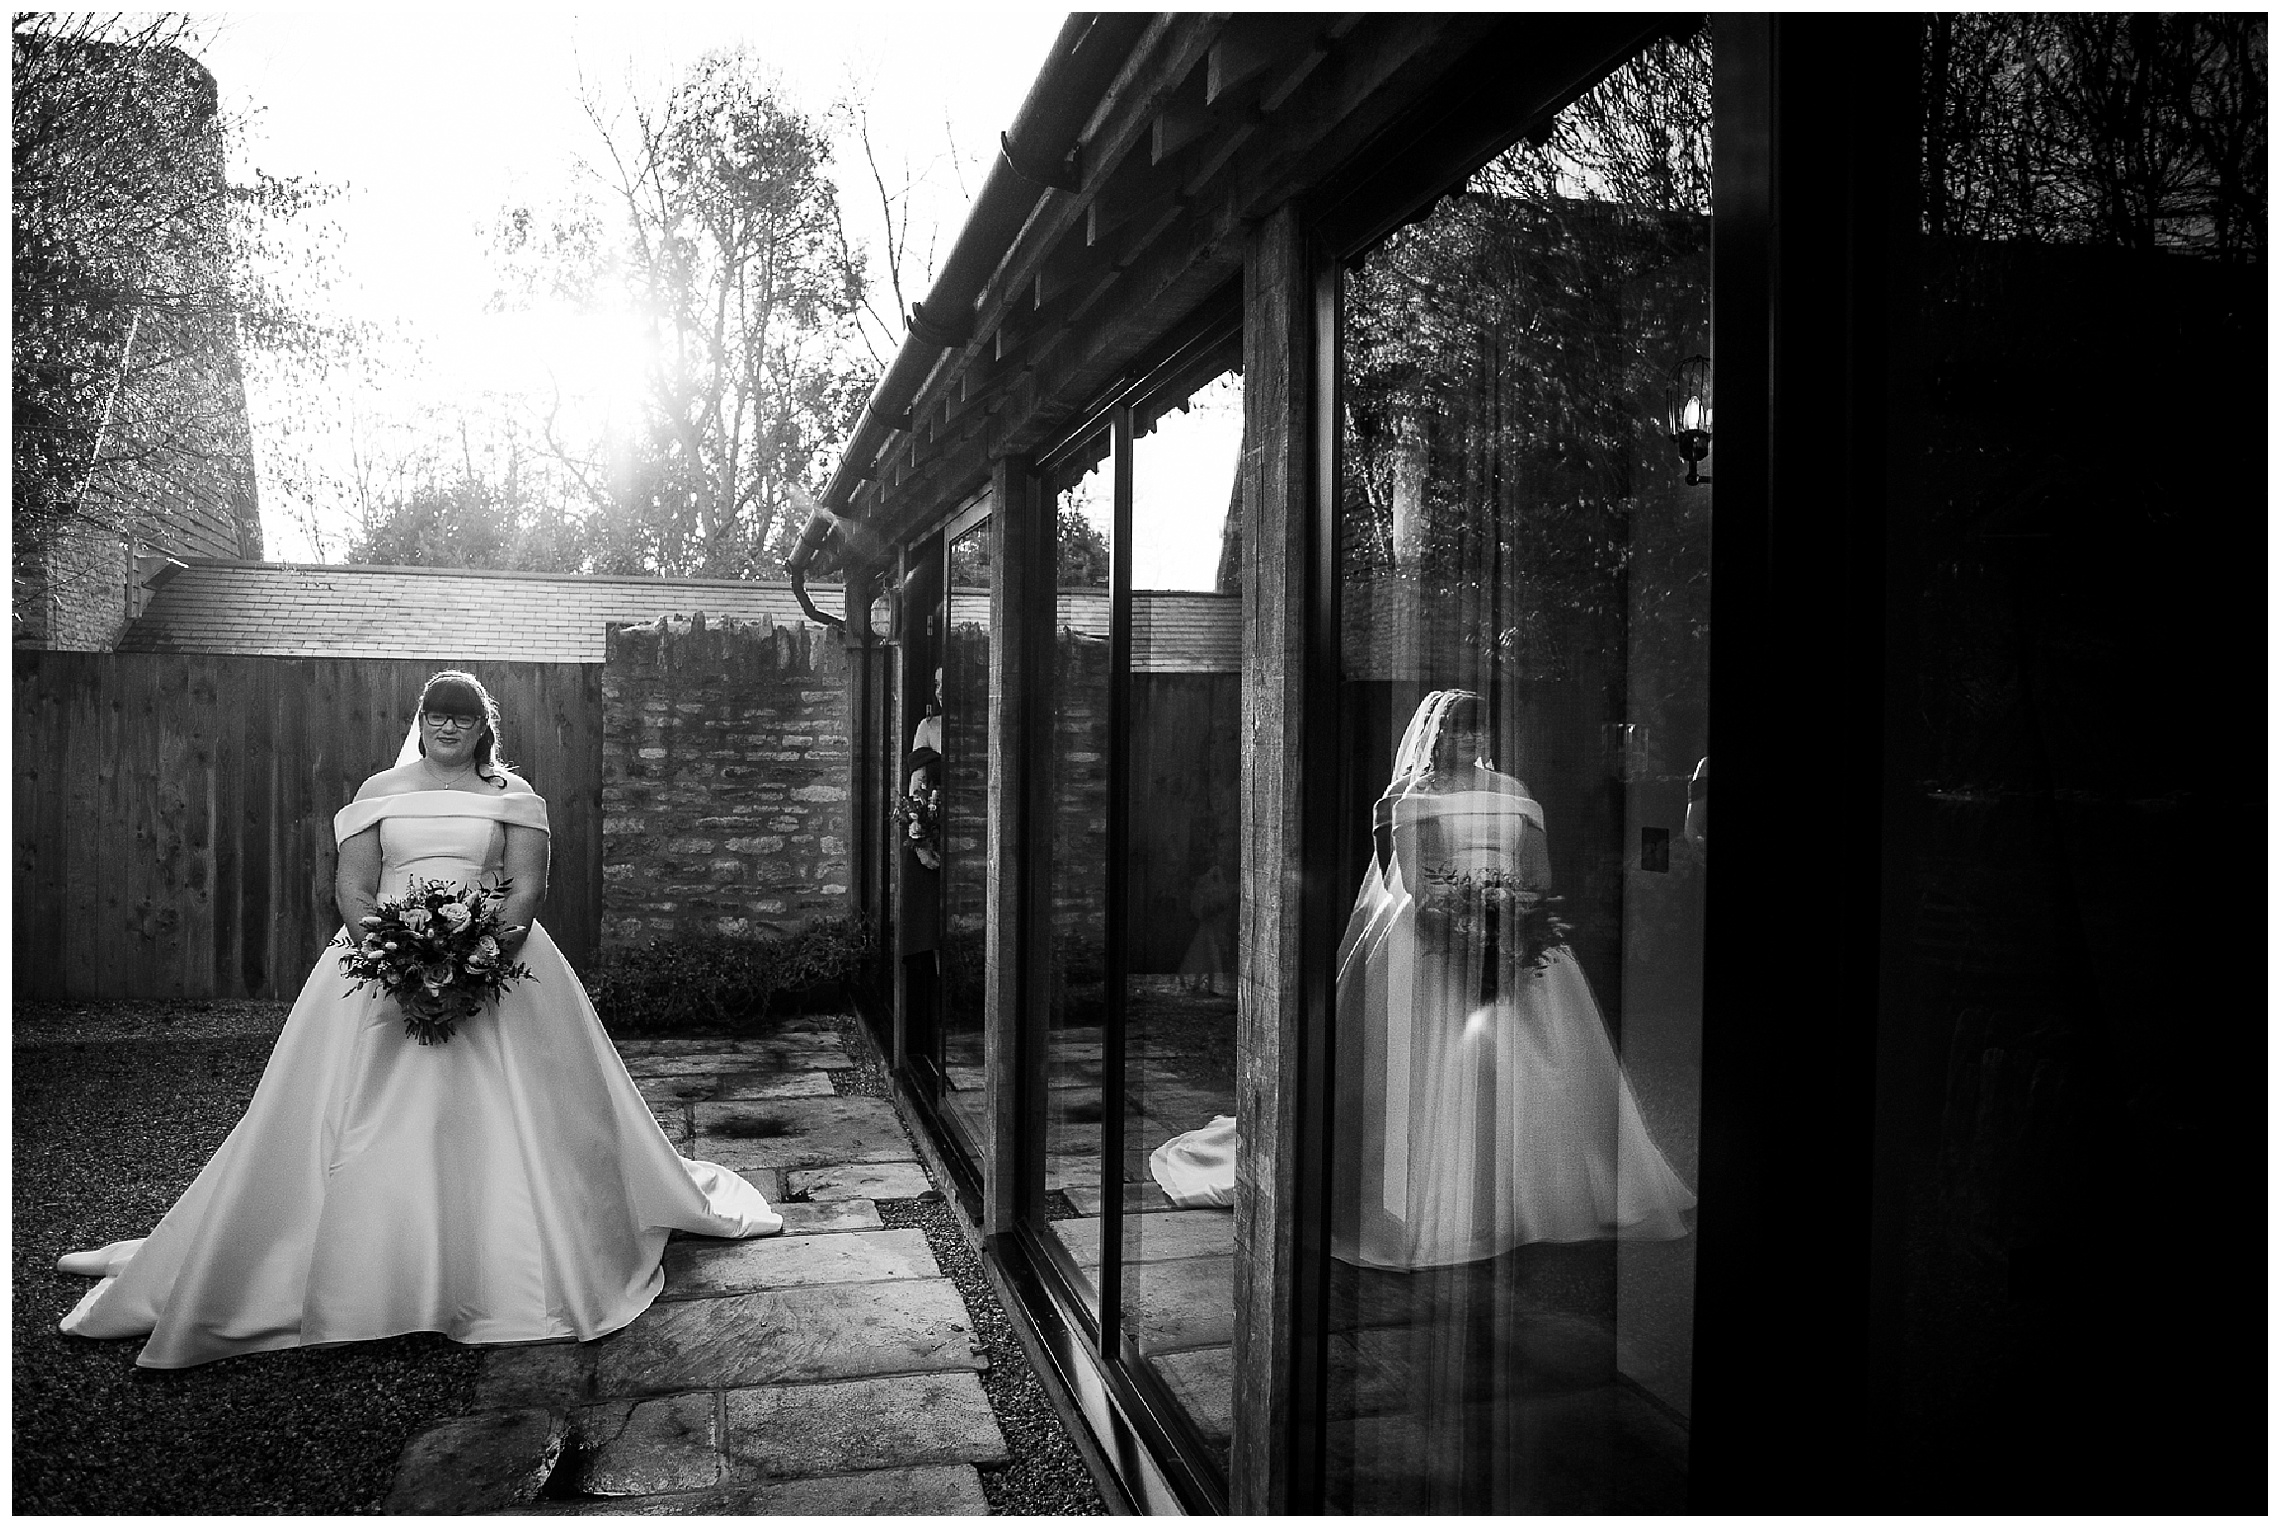 reflection of bride in windows at tythe barn in launton